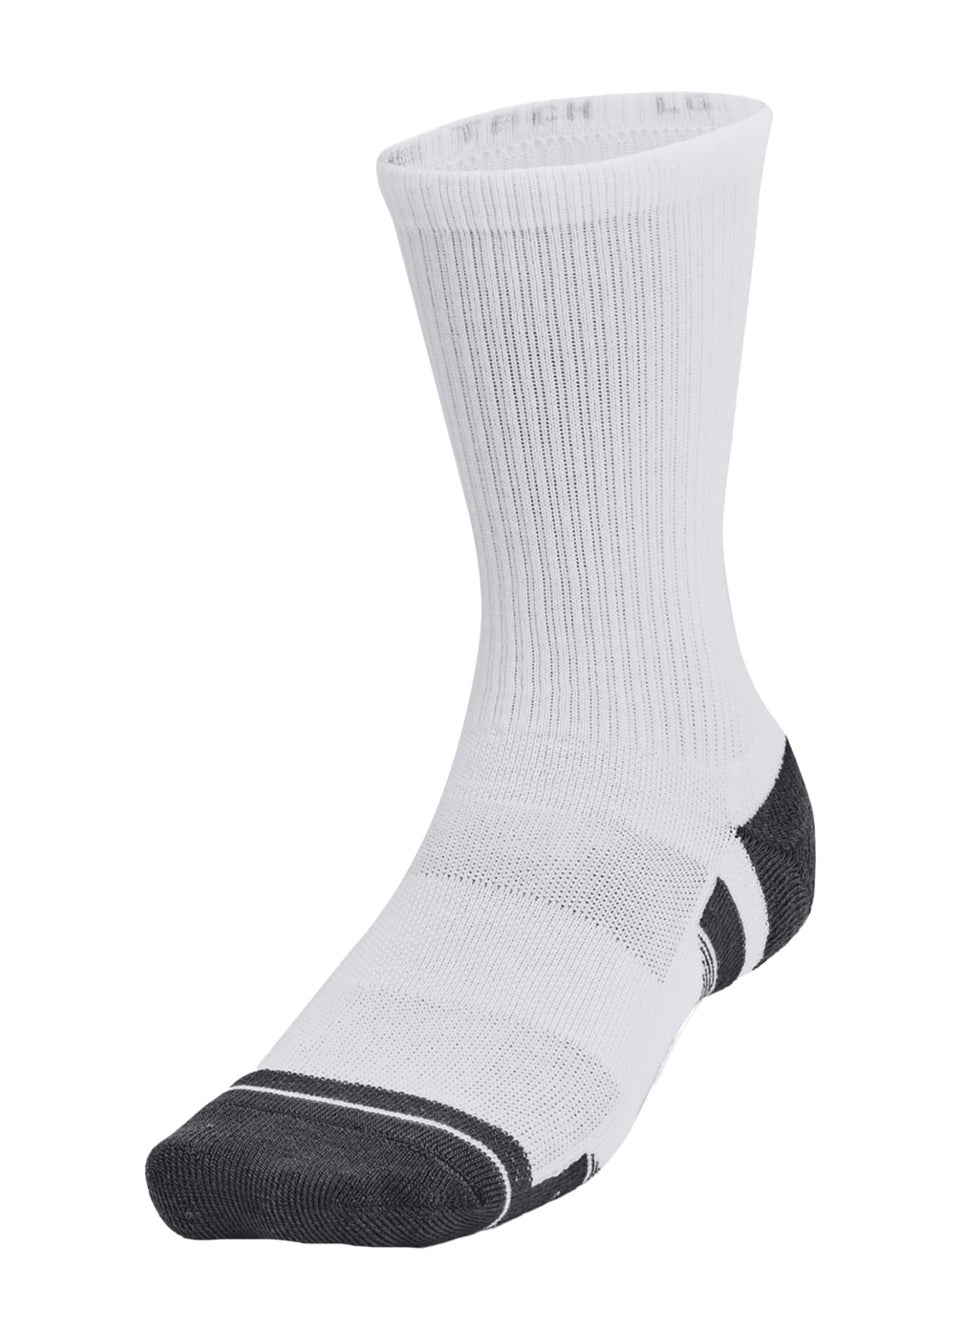 Under Armour White Performance Tech Crew Socks (Pack of 3)